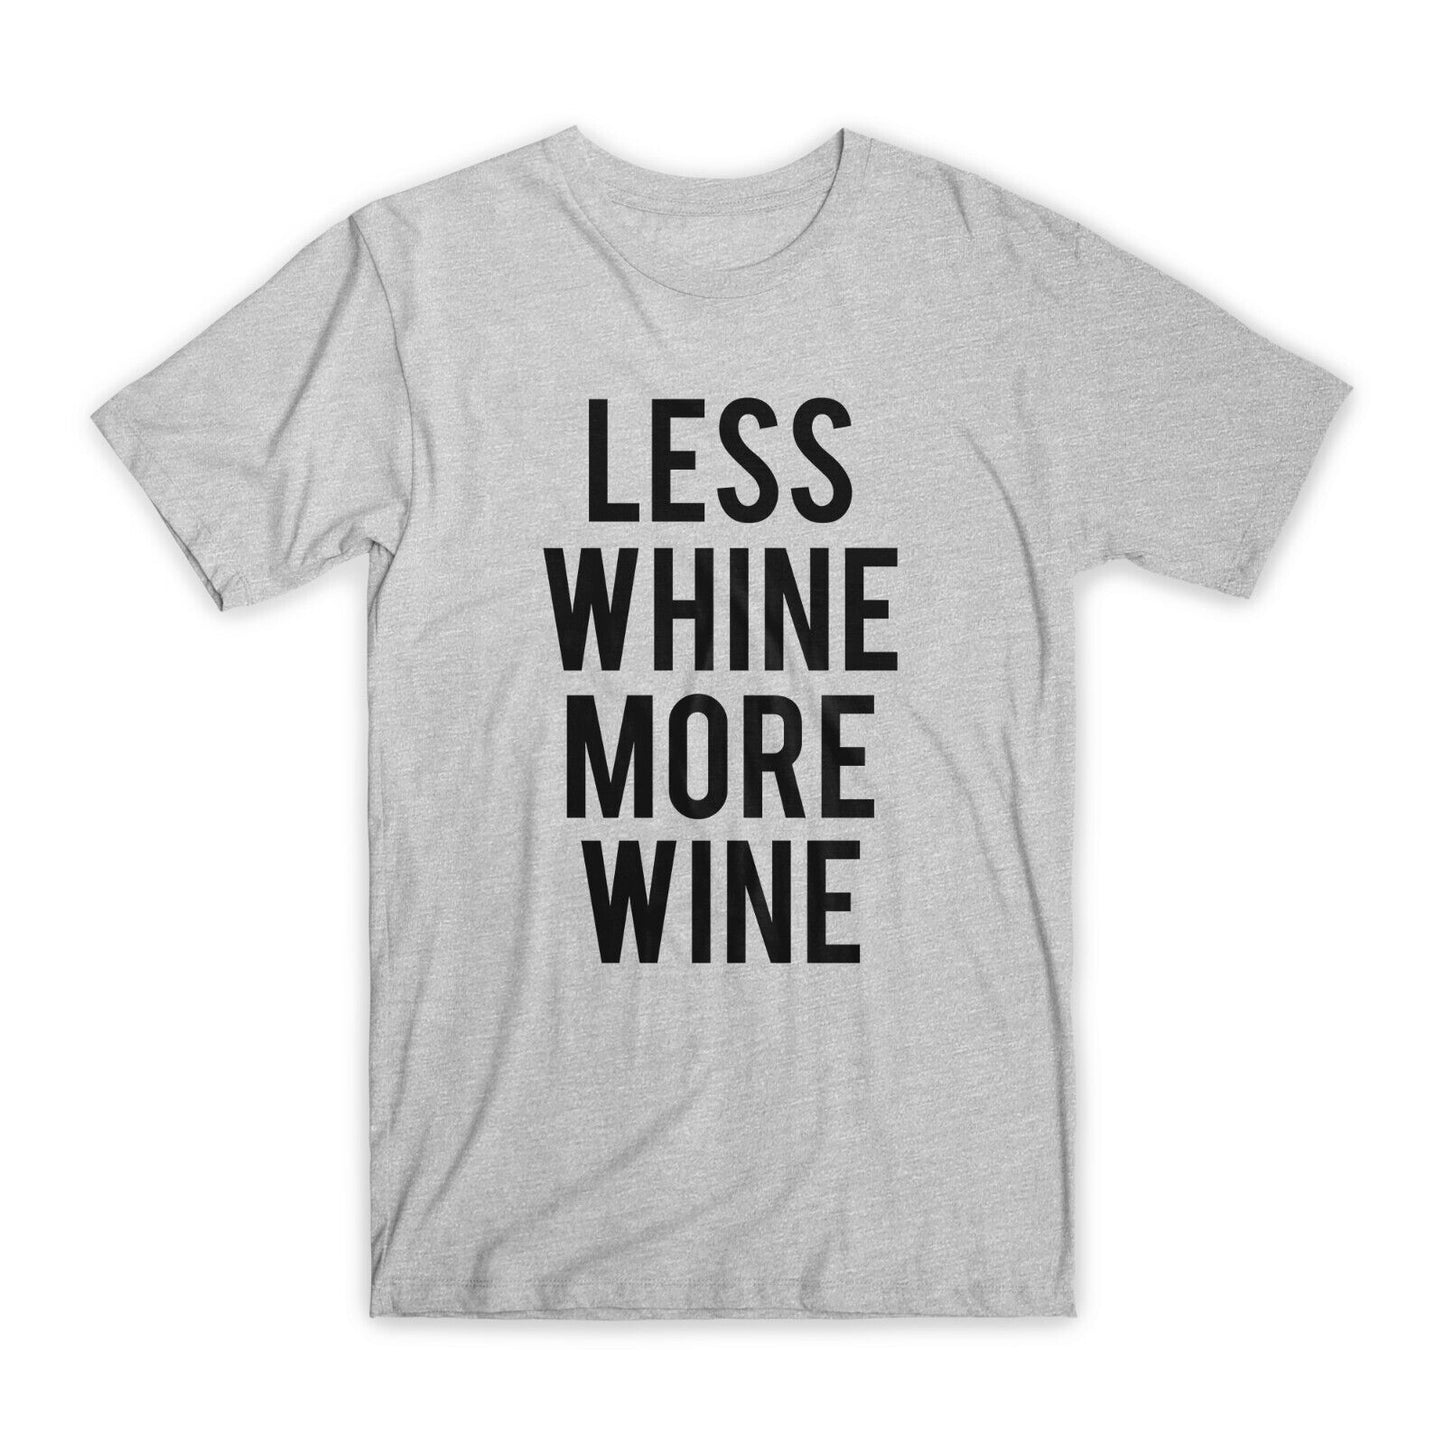 Less Whine More Wine T-Shirt Premium Soft Cotton Crew Neck Funny Tees Gifts NEW